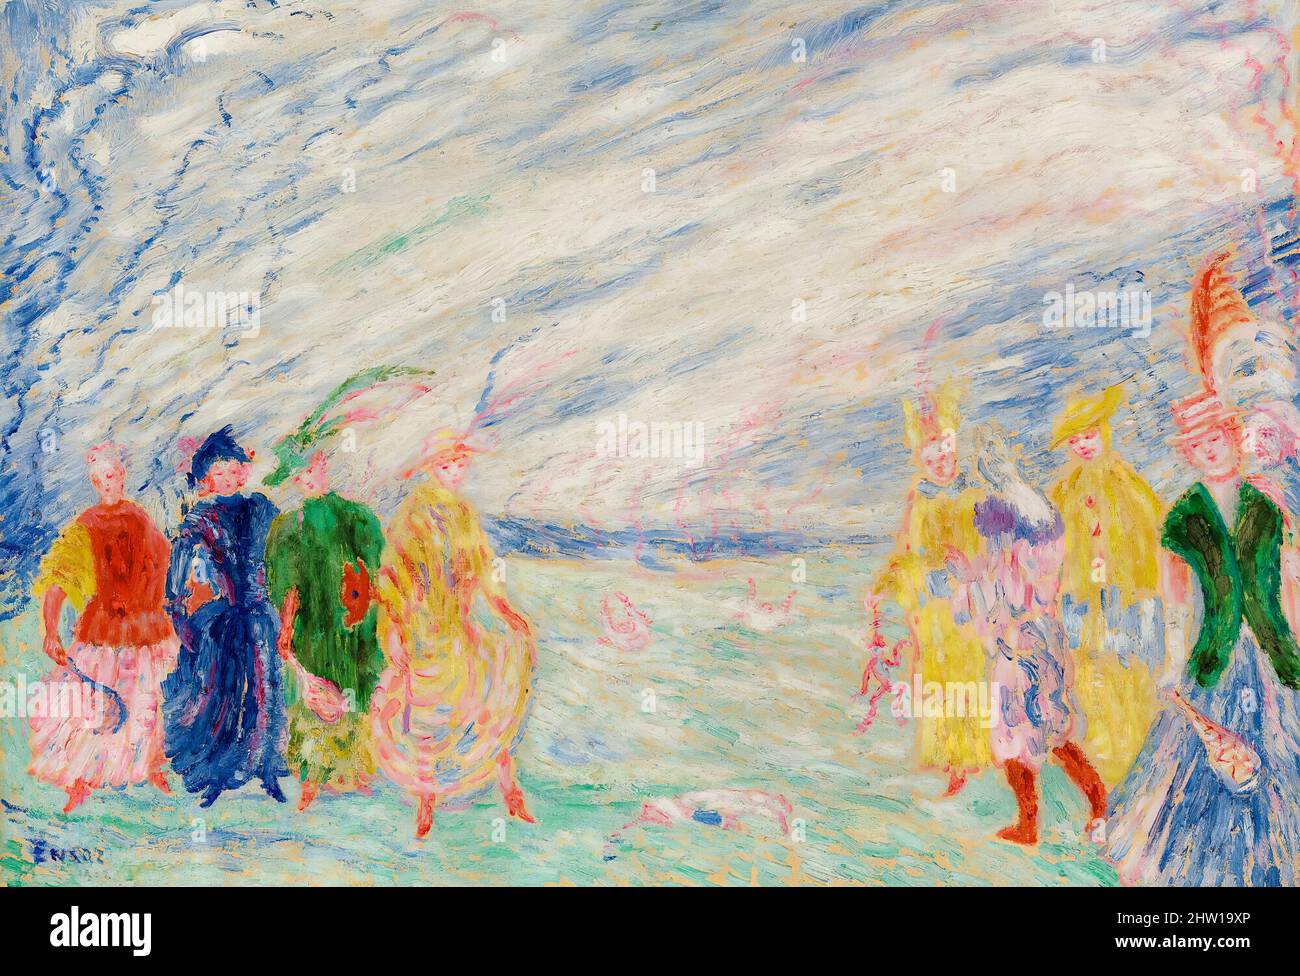 James Ensor, La rencontre (The Encounter), painting in oil on canvas, 1912 Stock Photo